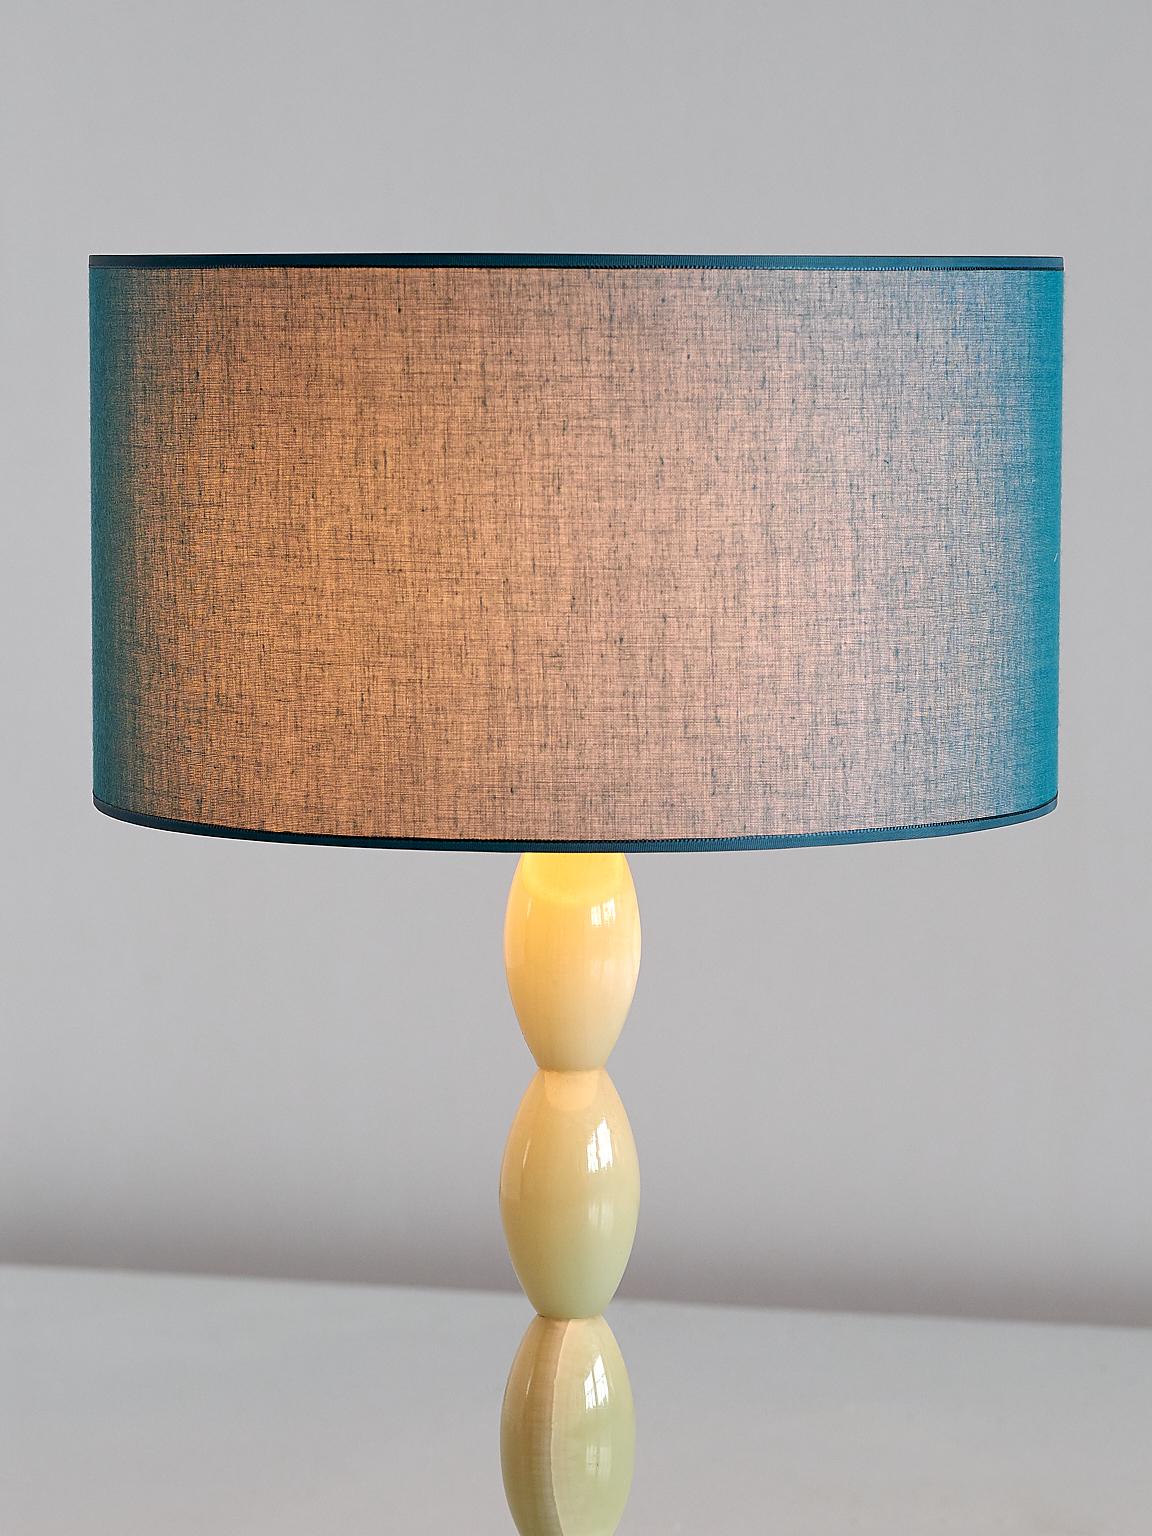 Light Green Onyx Table Lamp with Stacked Oval Base and Blue Shade, France, 1970s 1